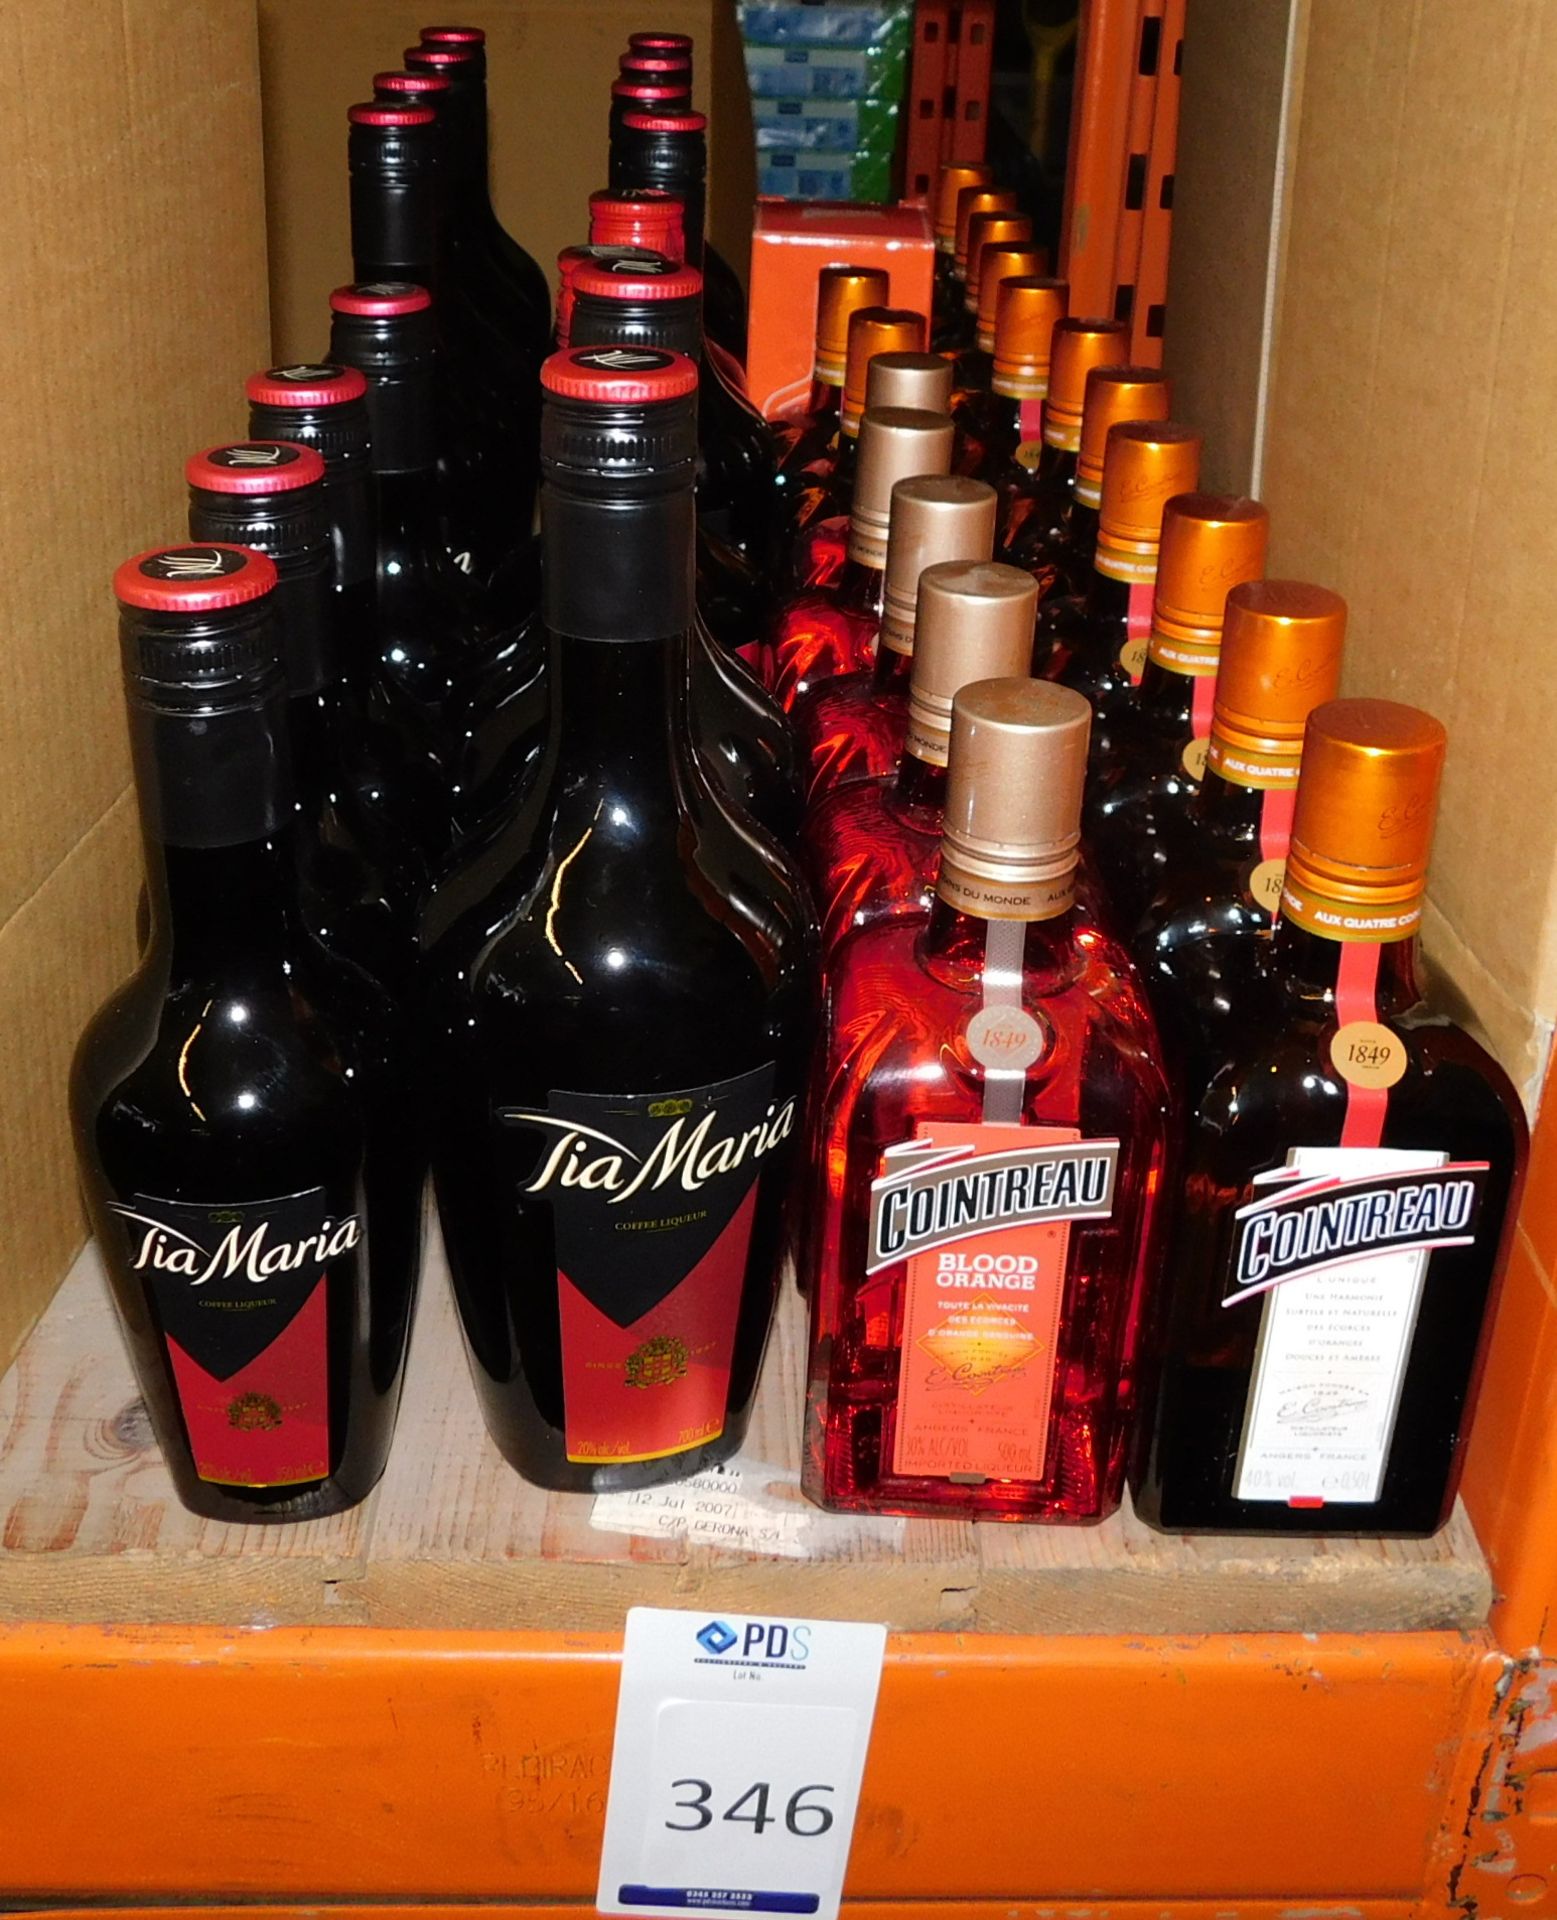 35 Bottles to Include 19 Assorted Cointreau, 50cl, 12 Tia Maria, 70cl & 4 Tia Maria, 35cl (Located